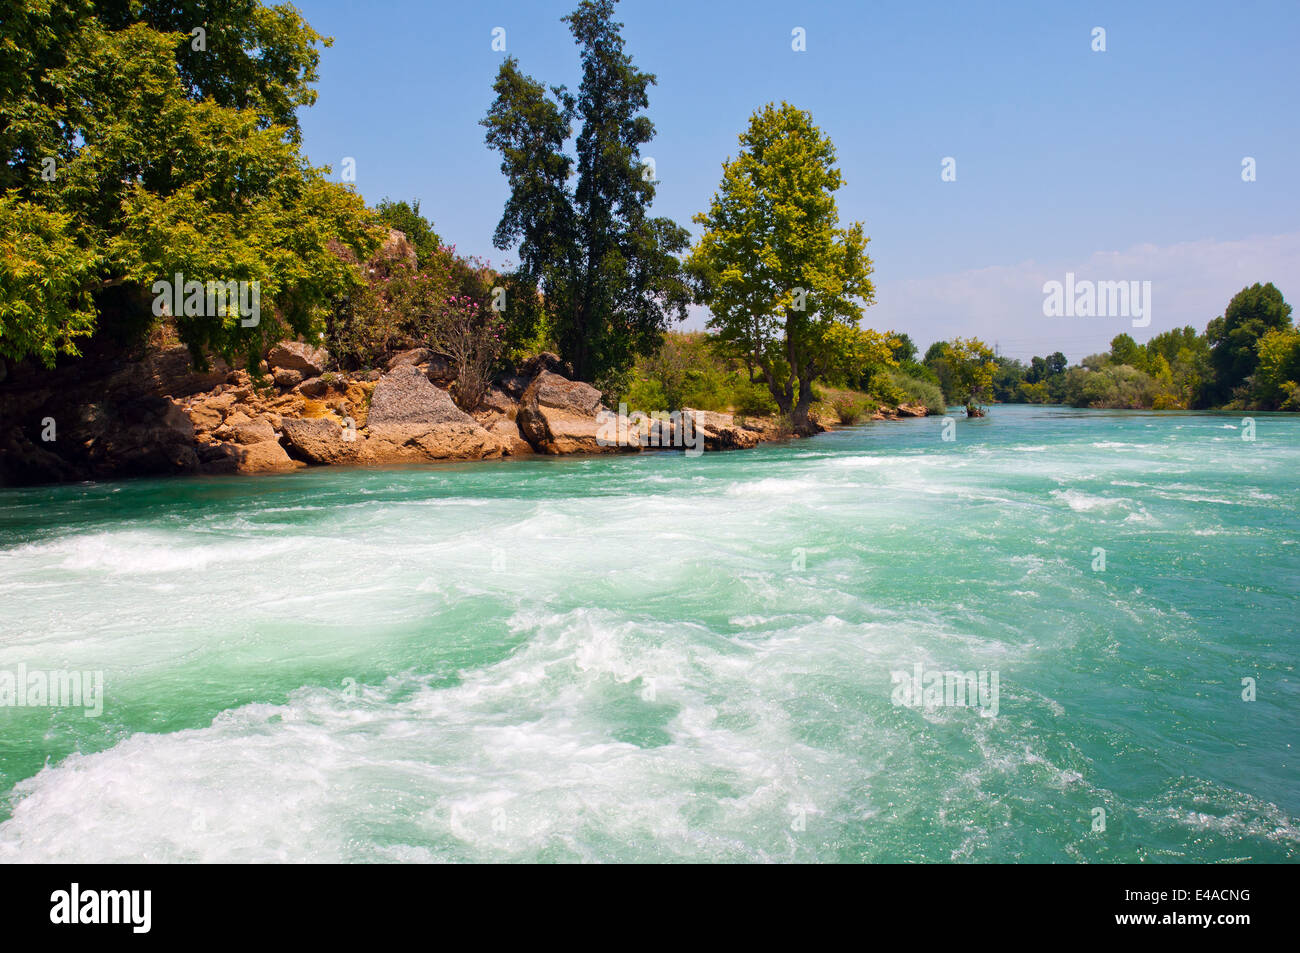 turkey river mountain water Manavgat fast cold trees shore narrow rugged foam summer day sunny nature landscape nobody Stock Photo